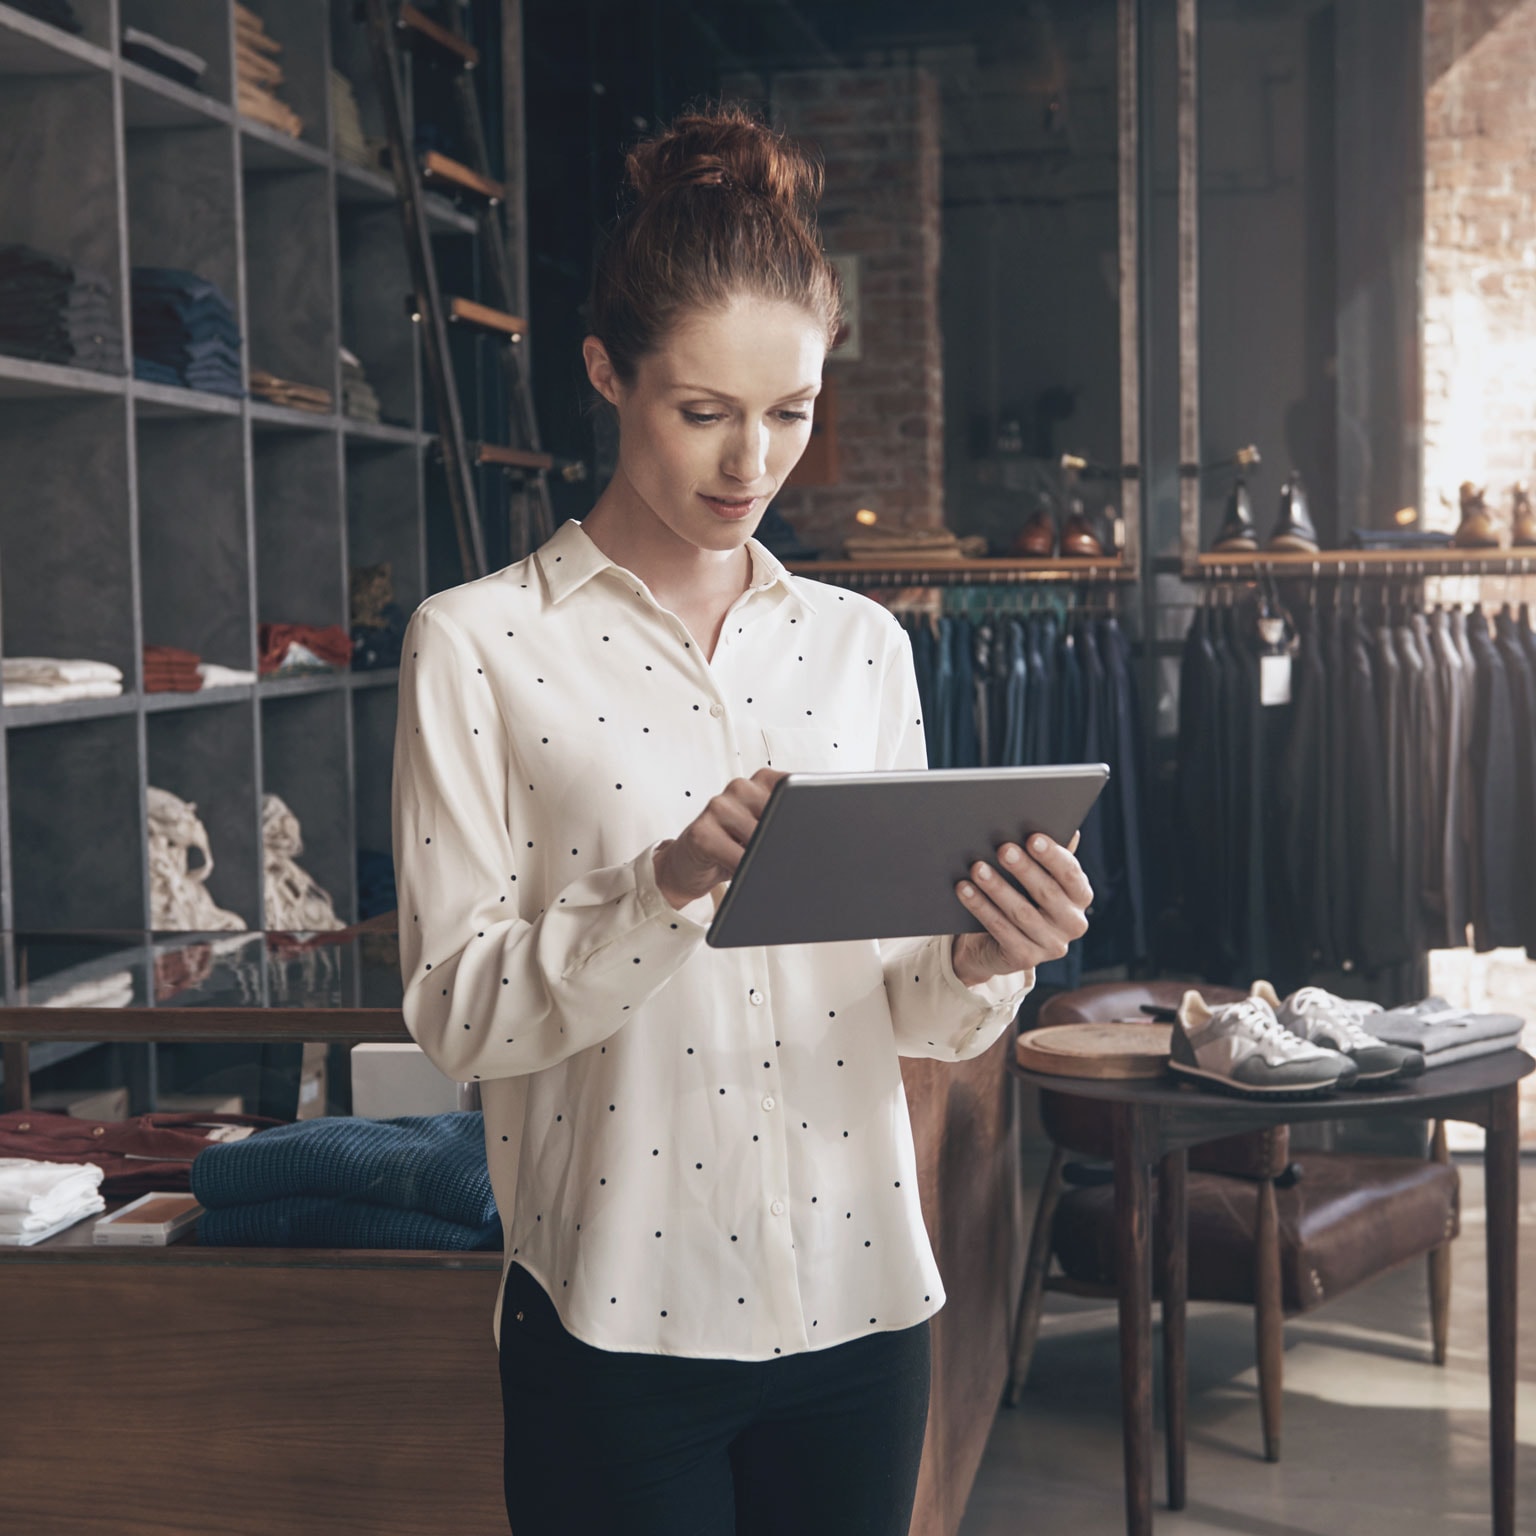 The Next Stage: How to Grow a Successful Omni-Channel Activewear